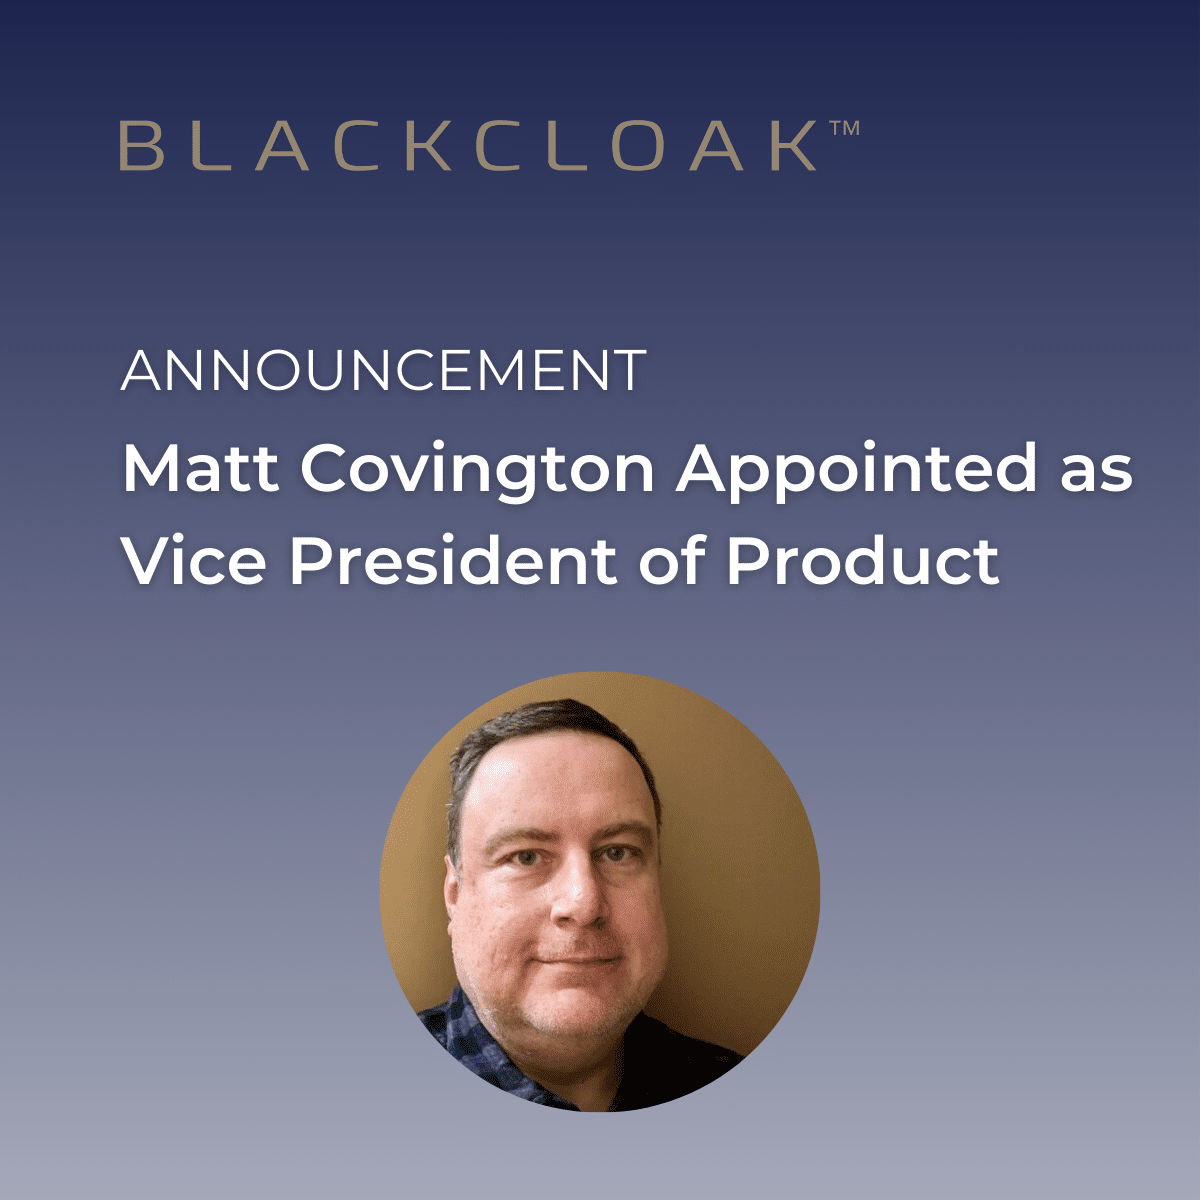 Announcement: Matt Covington Appointed as Vice President of Product